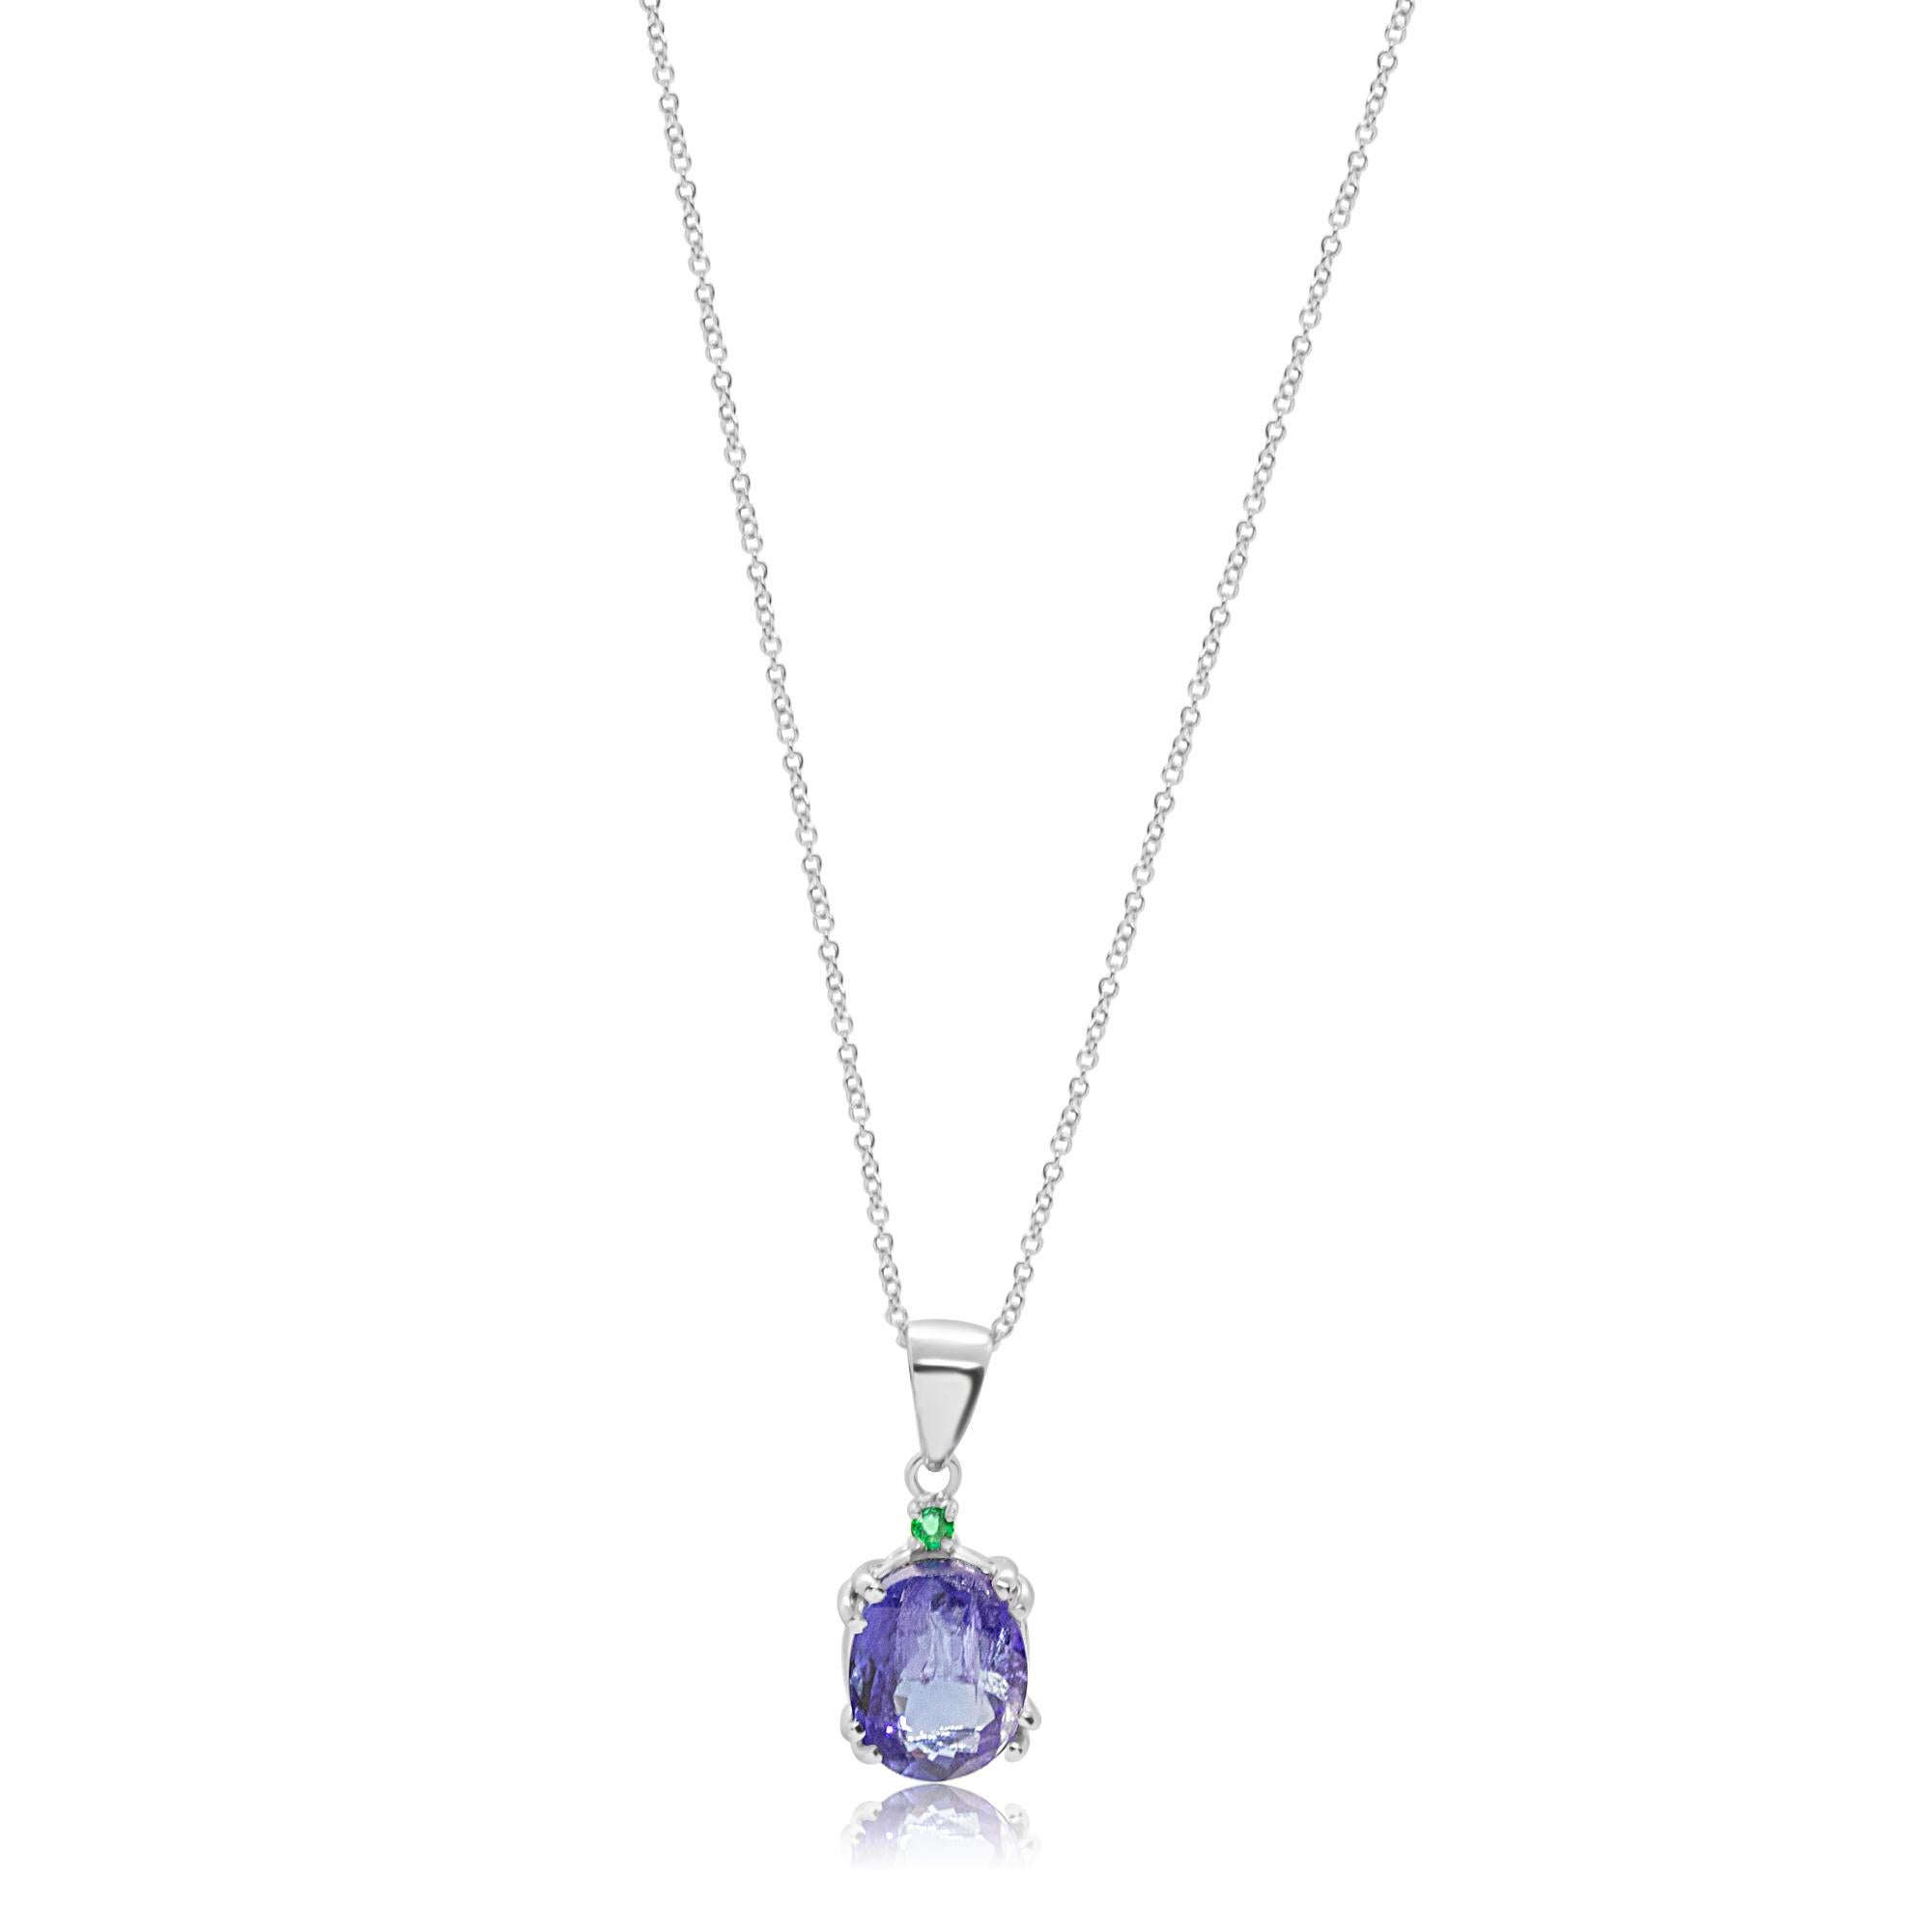 Cocktail jewellery in 18 karat white gold, featuring a 4.42 carats Oval Tanzanite and Precious Emerald. The perfect handmade jewellery for an unforgettable cocktail night.
 
A luxurious and unique pendant necklace, featuring rare and precious